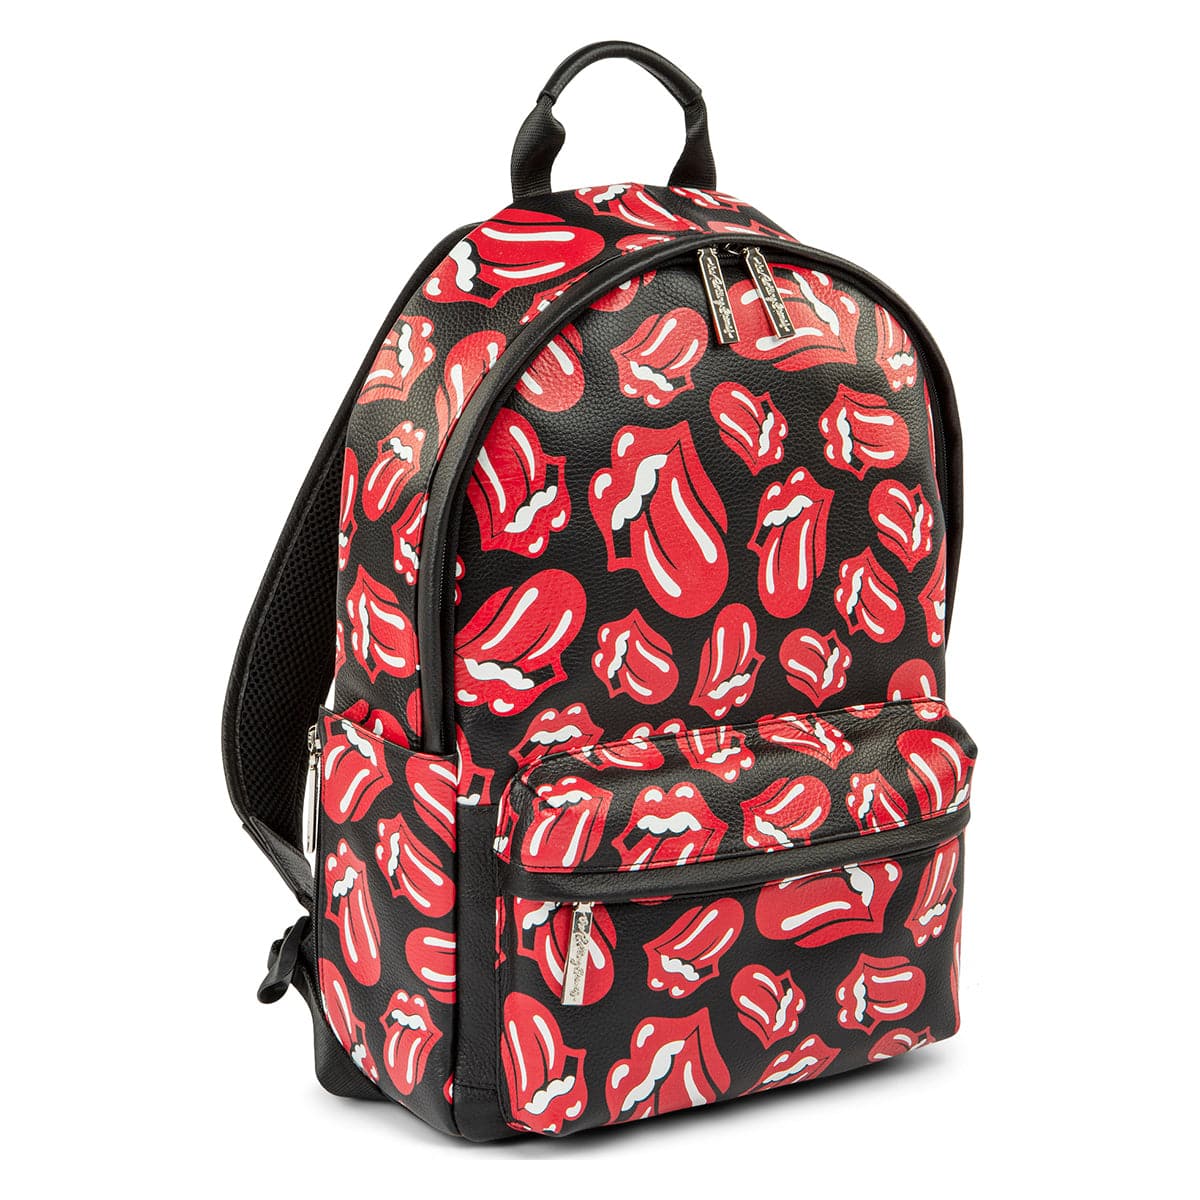 The Rolling Stones The Watts Backpack